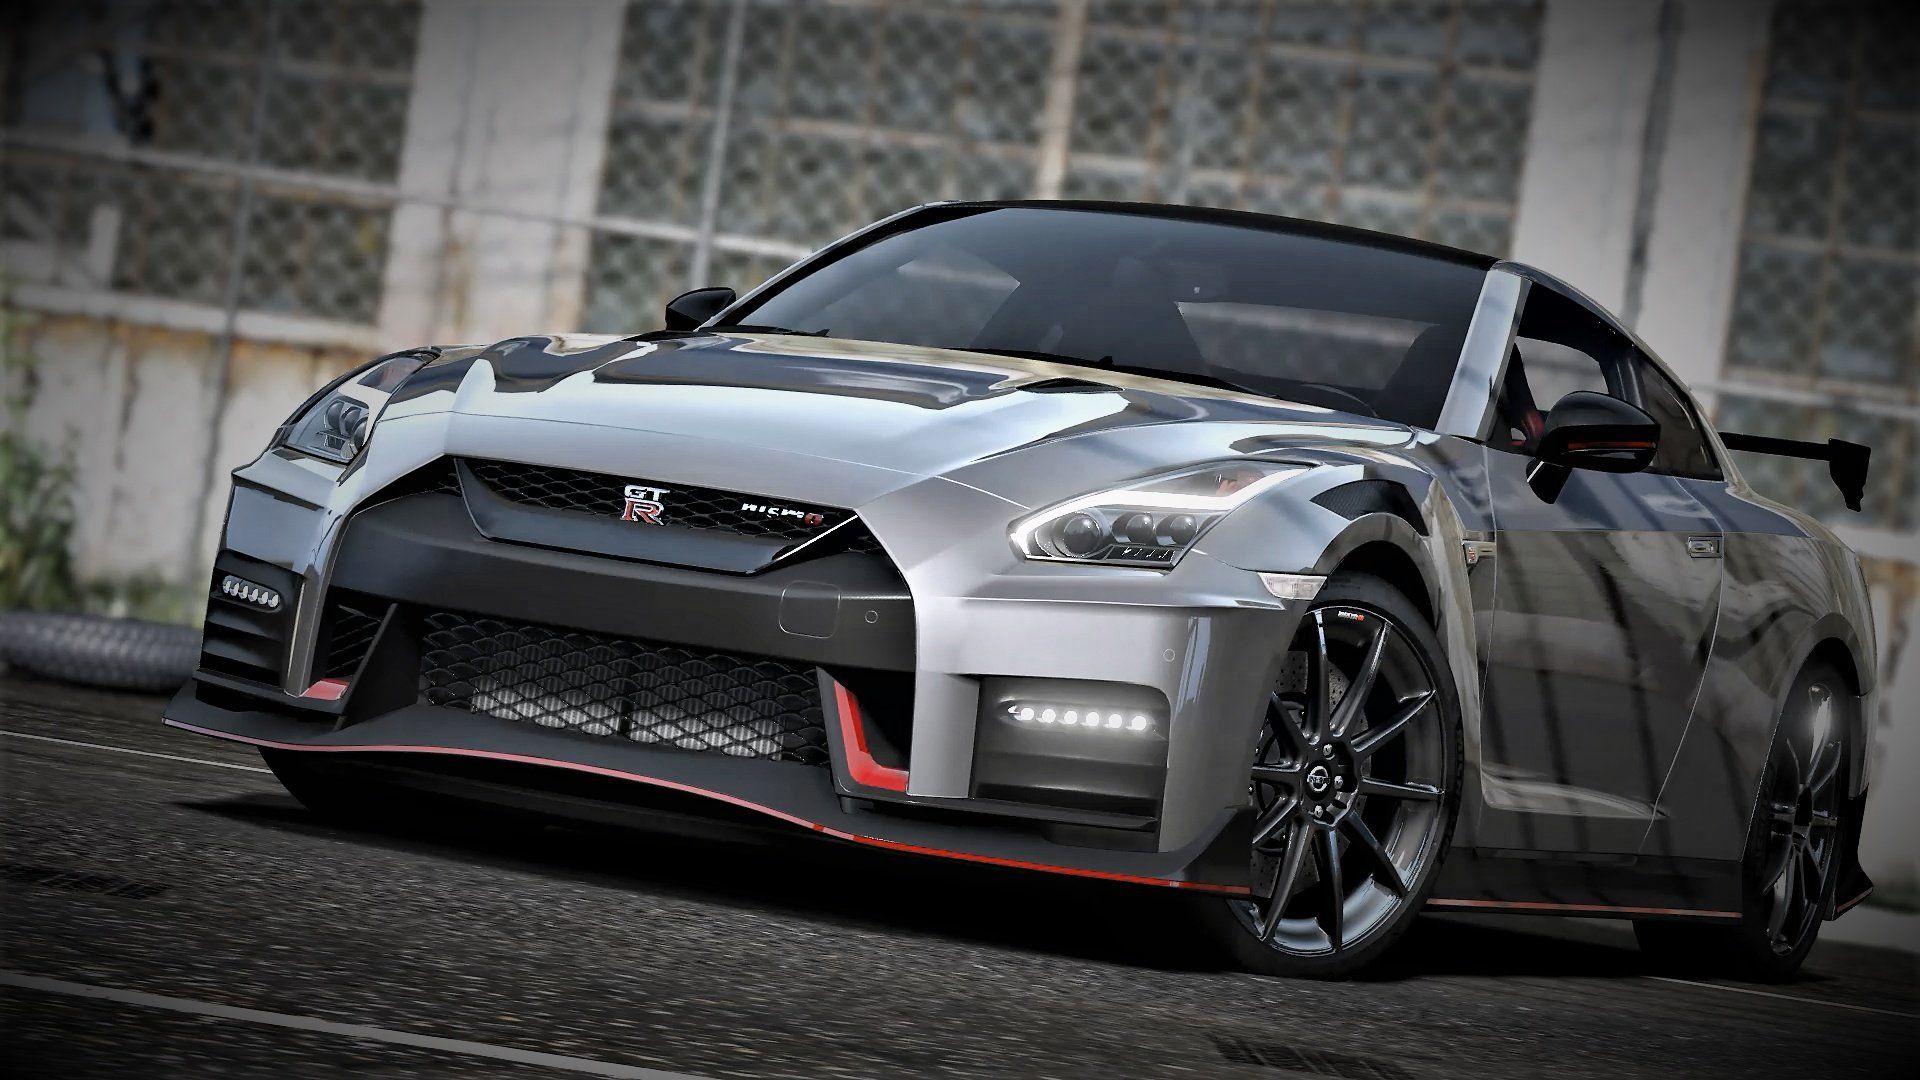 Nissan Gt R Sports 2020 Wallpapers Top Free Nissan Gt R Sports